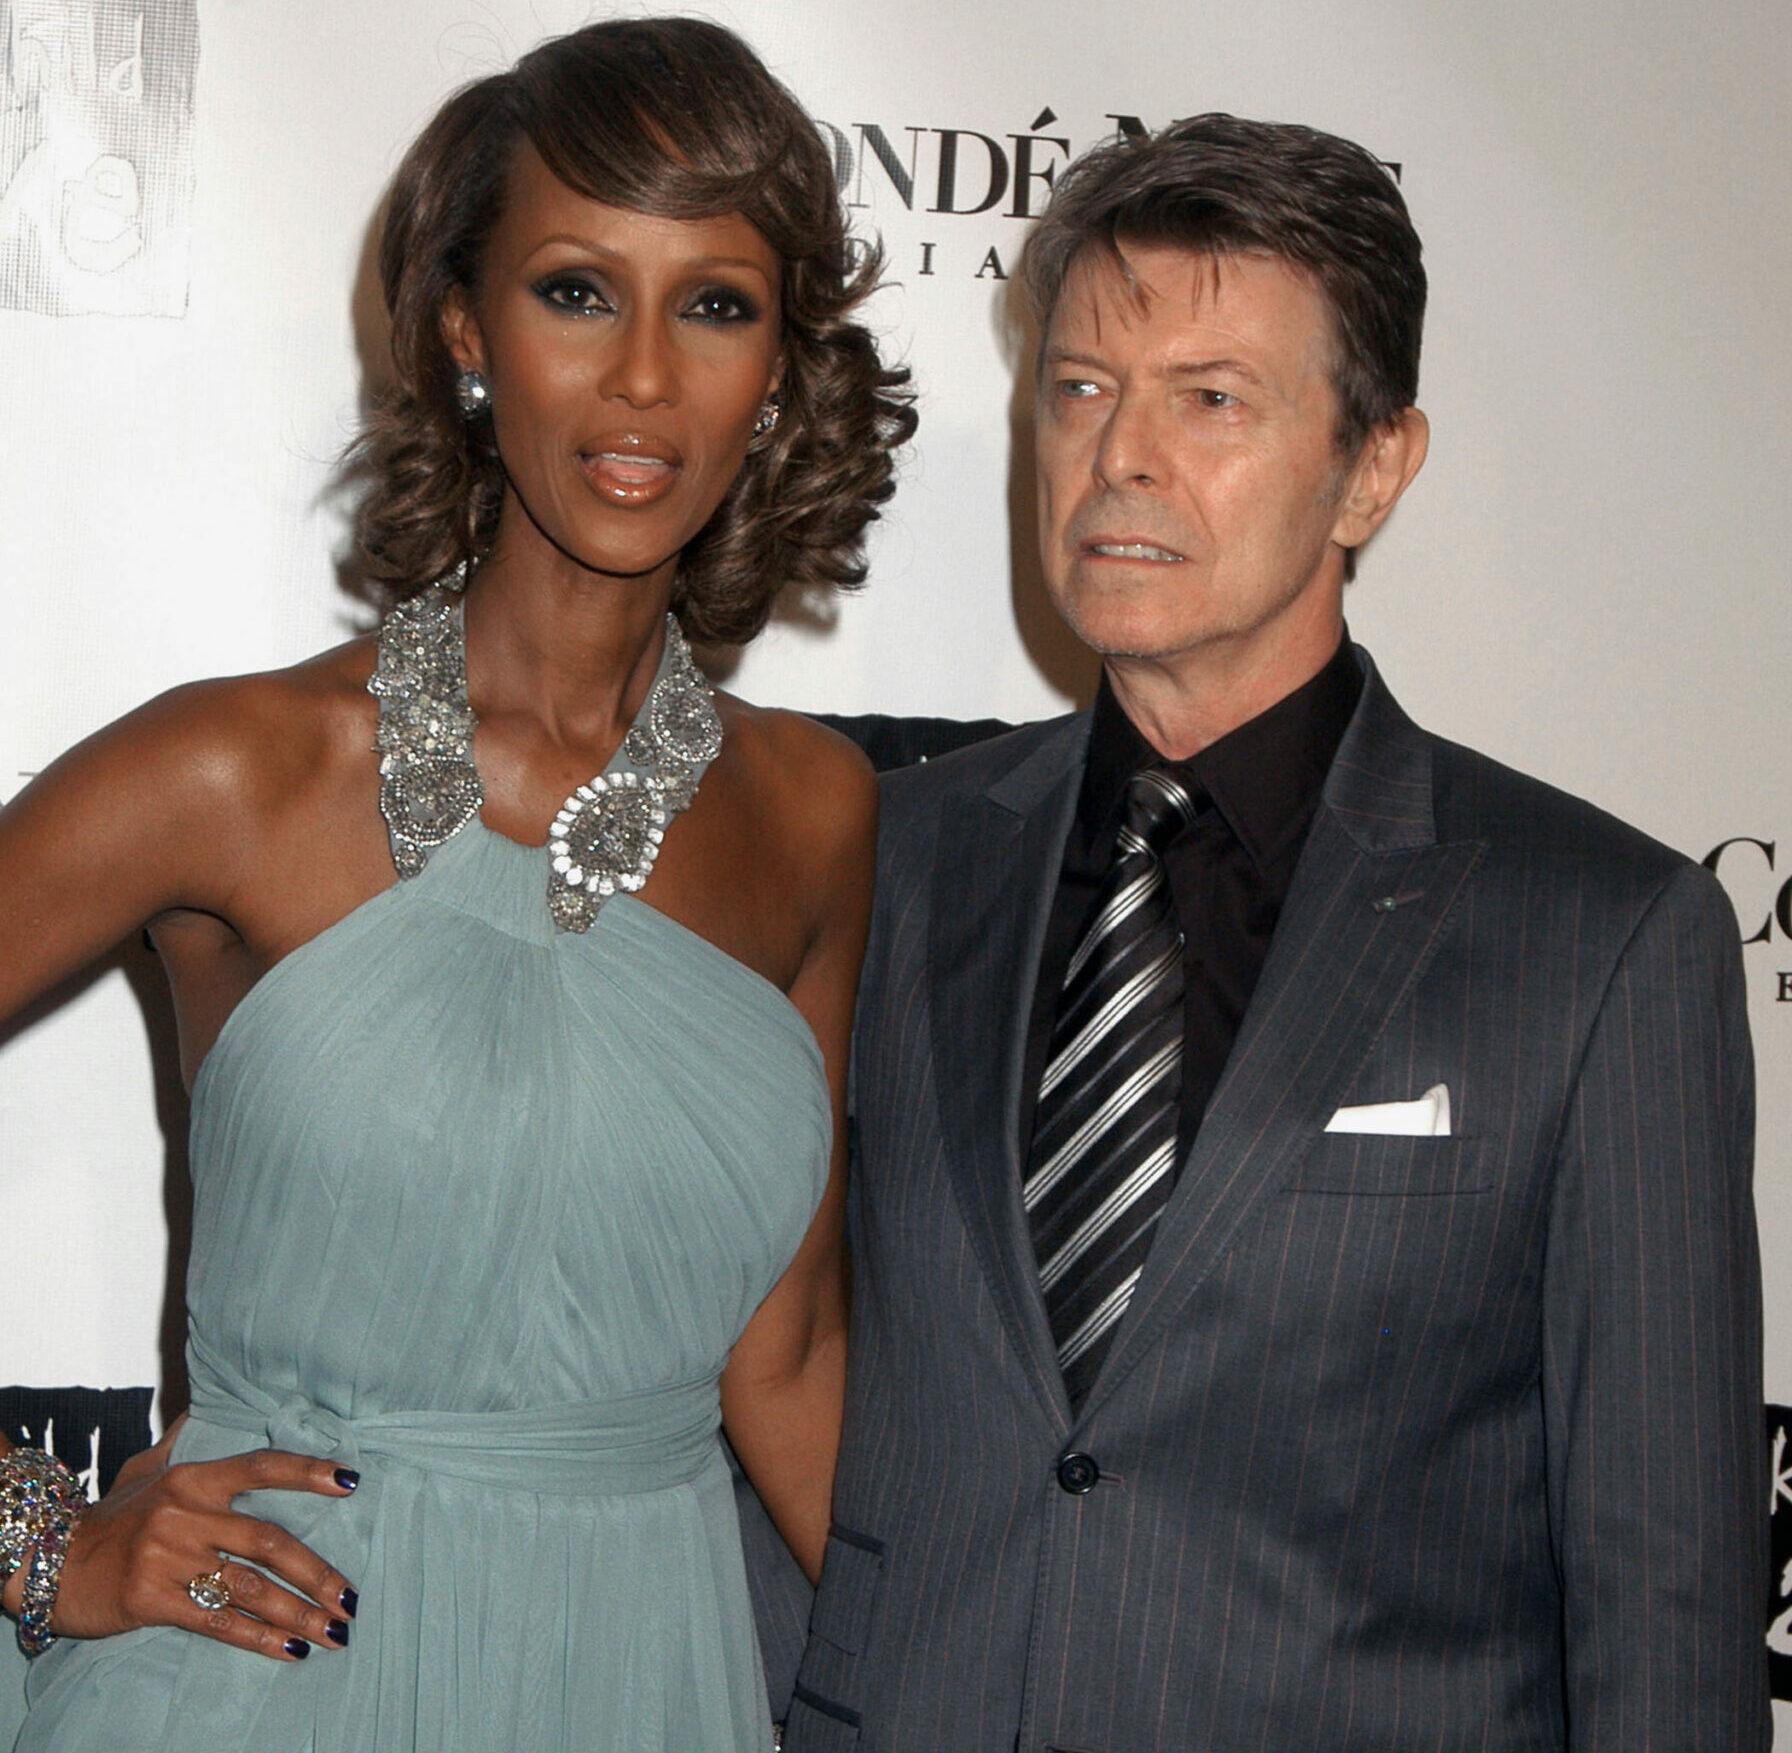 IMAN AND DAVID BOWIE AT THE FOURTH ANNUAL BLACK BALL CONCERT FOR KEEP A CHILD ALIVE, HELD AT HAMMERSTEIN BALLROOM, NEW YORK. 25 OCTOBER 2007.